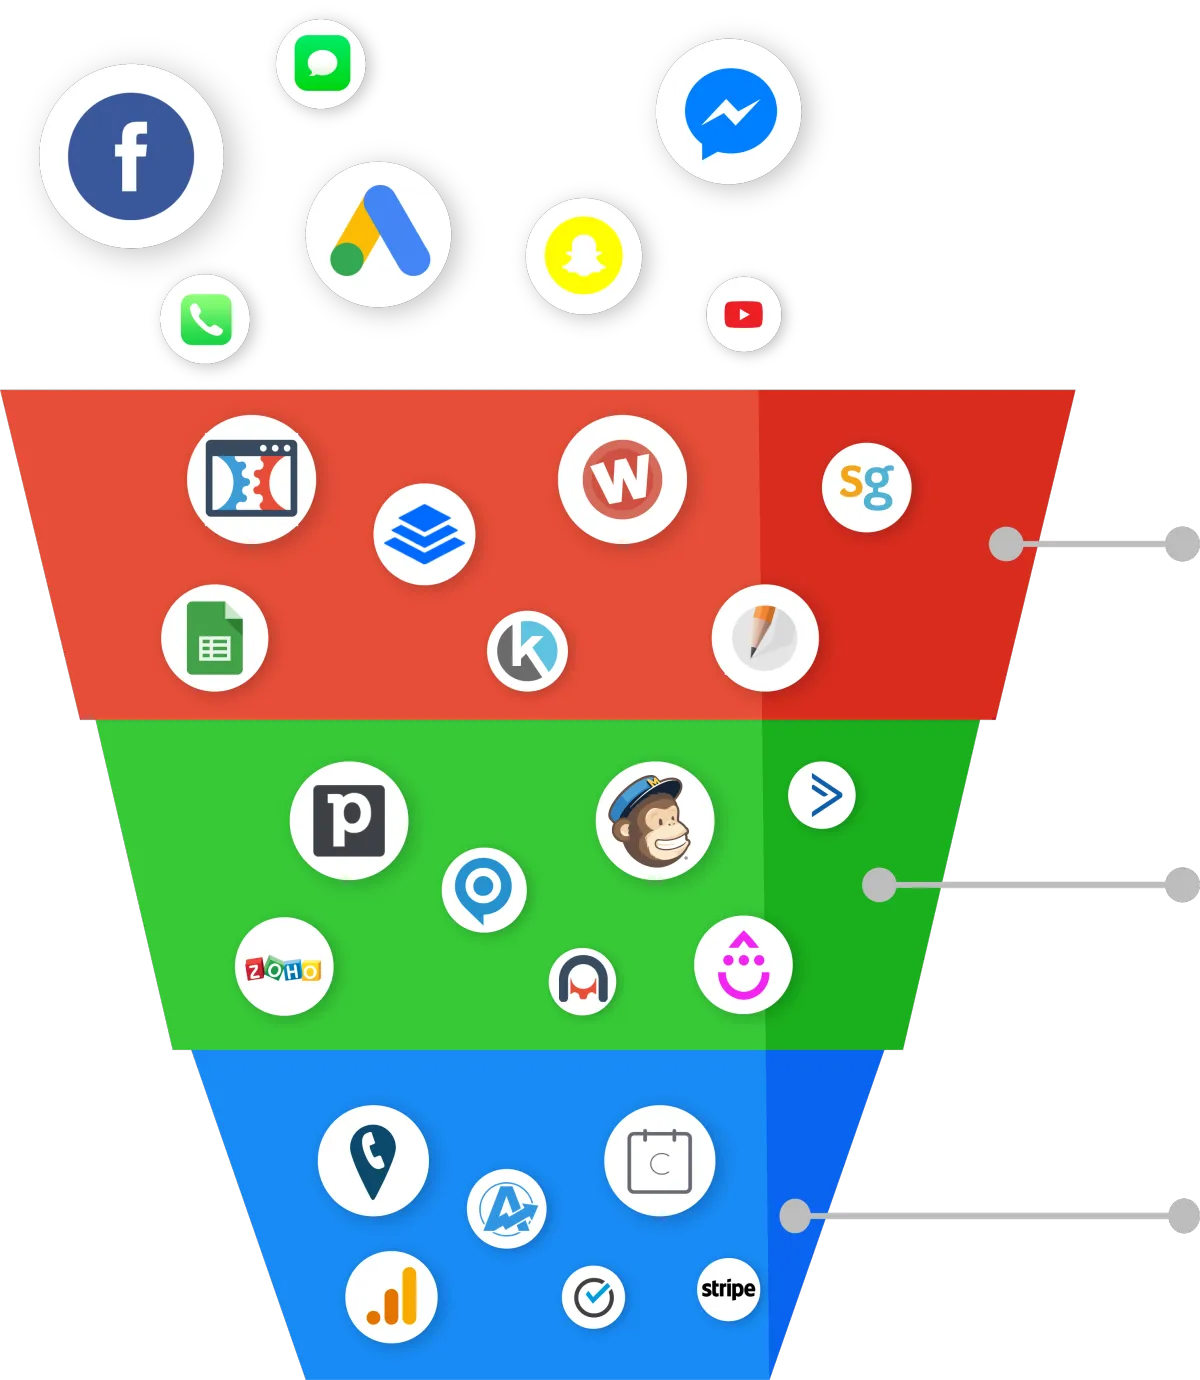 A funnel with three sections (red, green, blue from top to bottom). In each section there are white circles with brand logos inside each white circle.